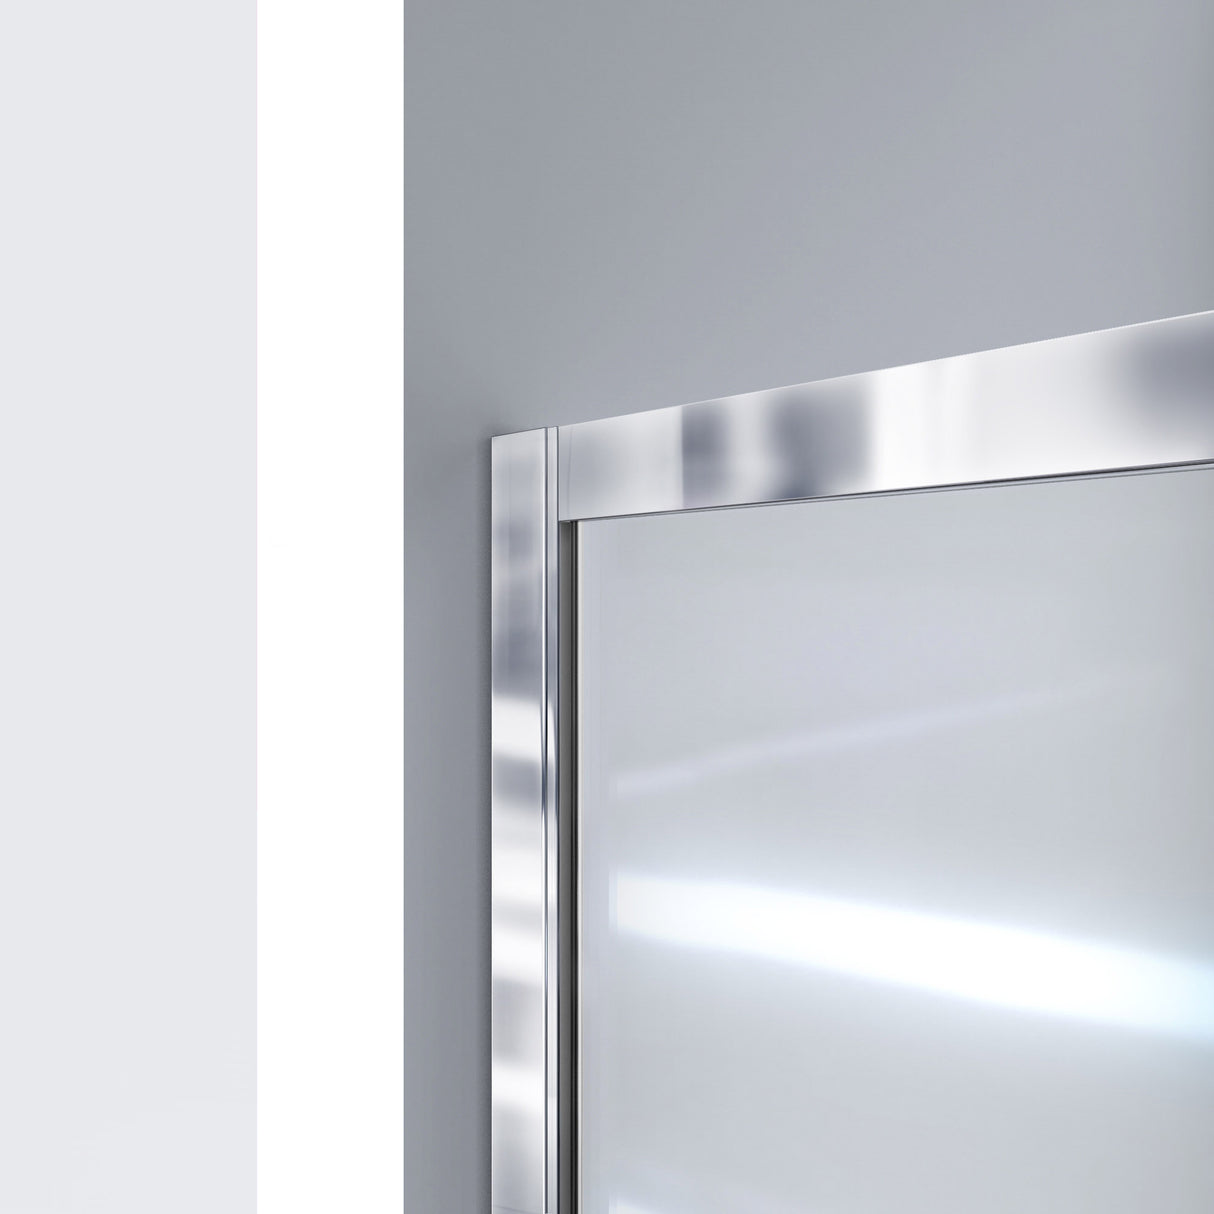 DreamLine Infinity-Z 34 in. D x 60 in. W x 74 3/4 in. H Clear Sliding Shower Door in Brushed Nickel and Left Drain Biscuit Base